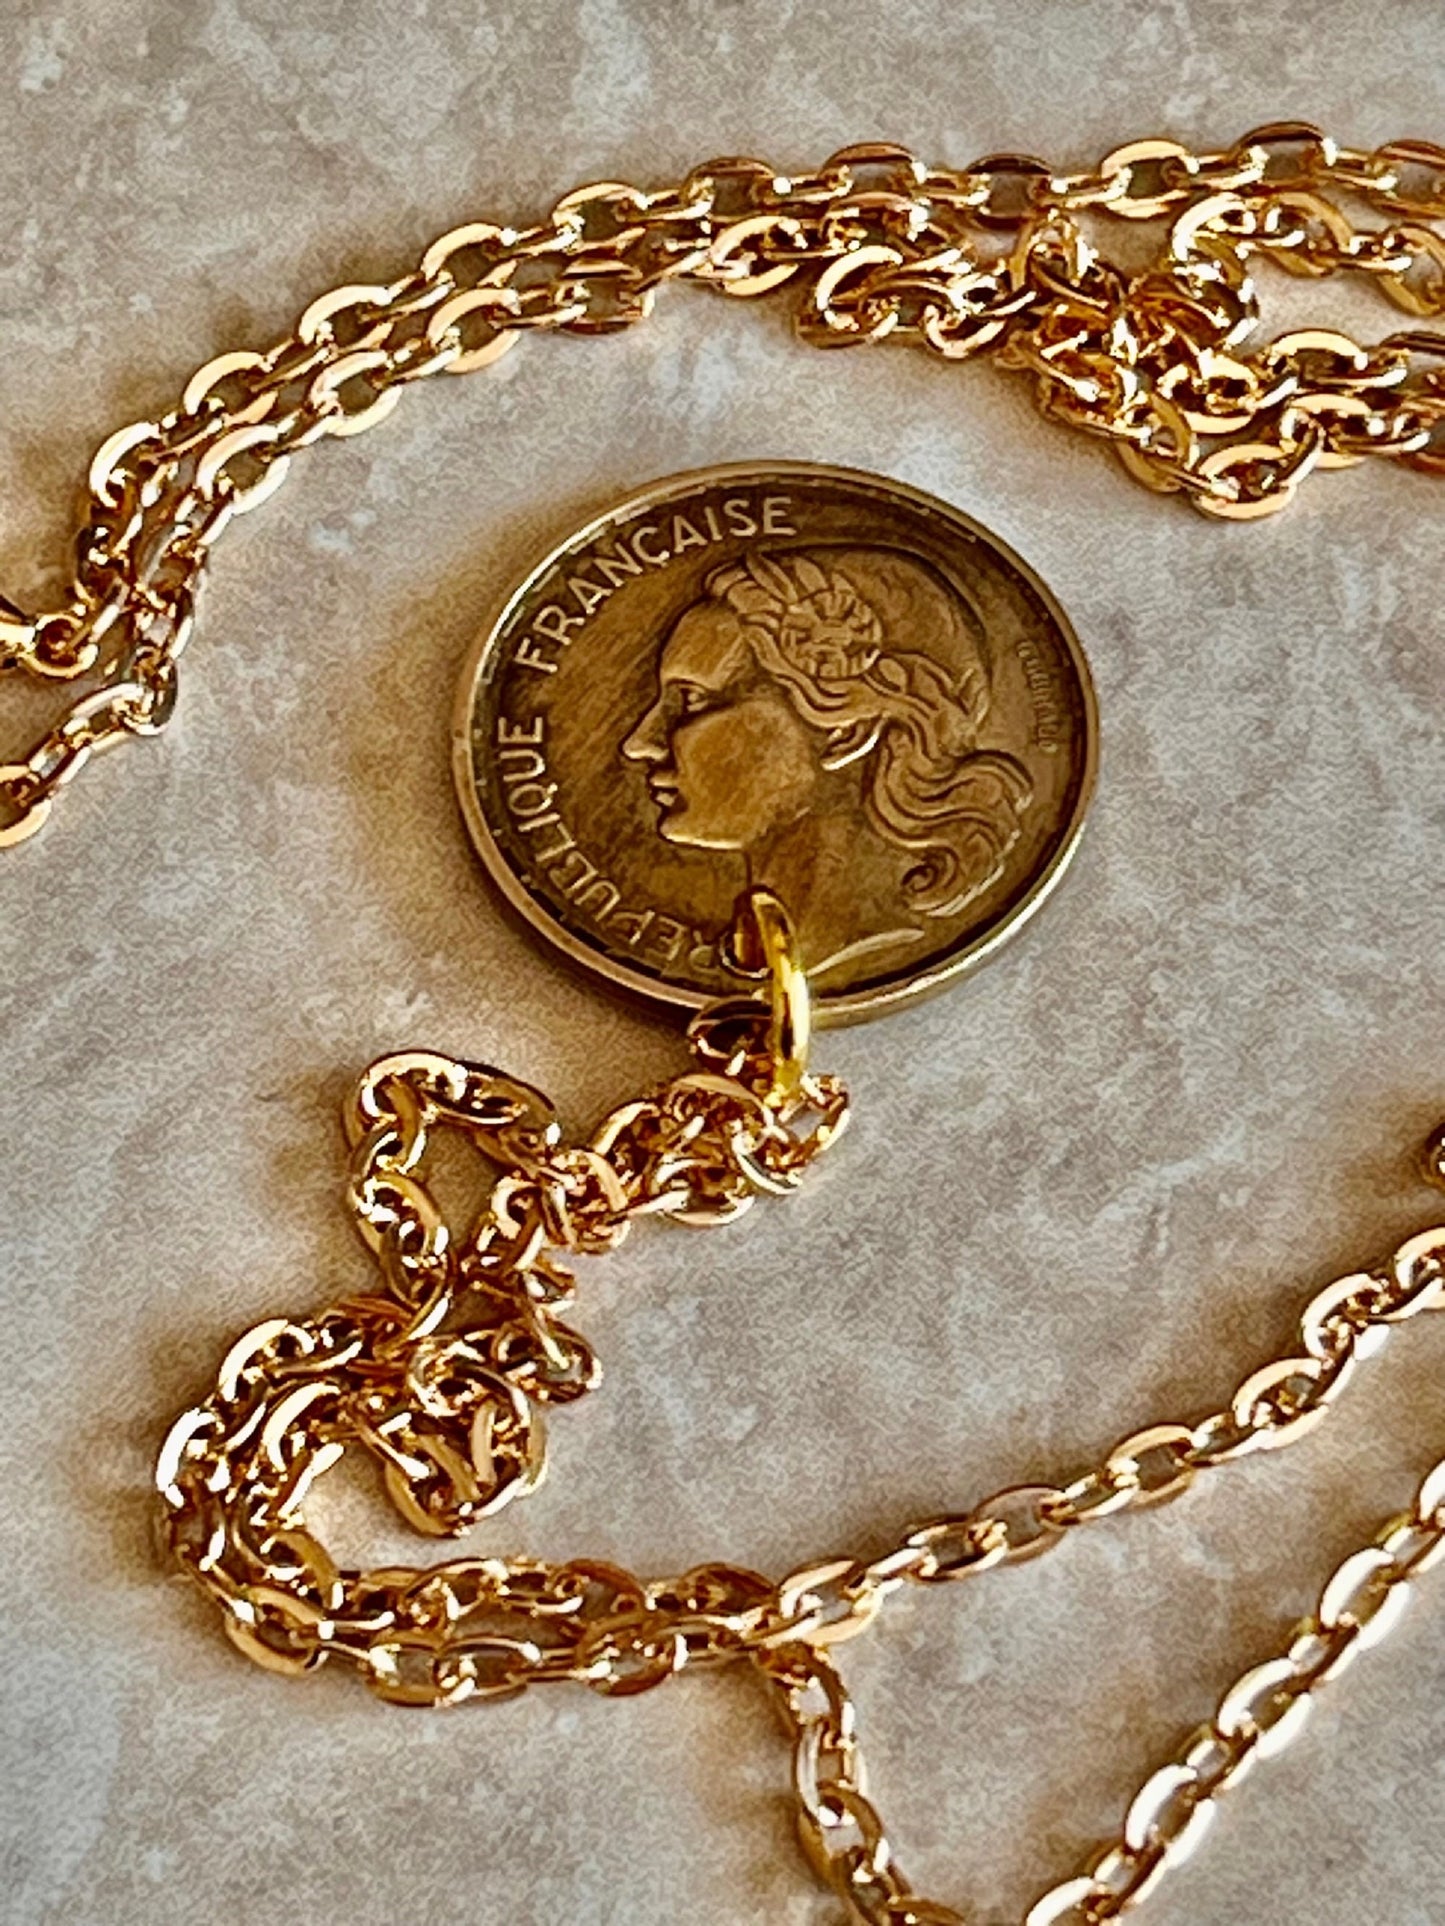 France Coin Necklace French 20 Francs Custom Pendant Custom Made Charm Gift For Friend Coin Charm Gift For Him, Coin Collector, World Coins